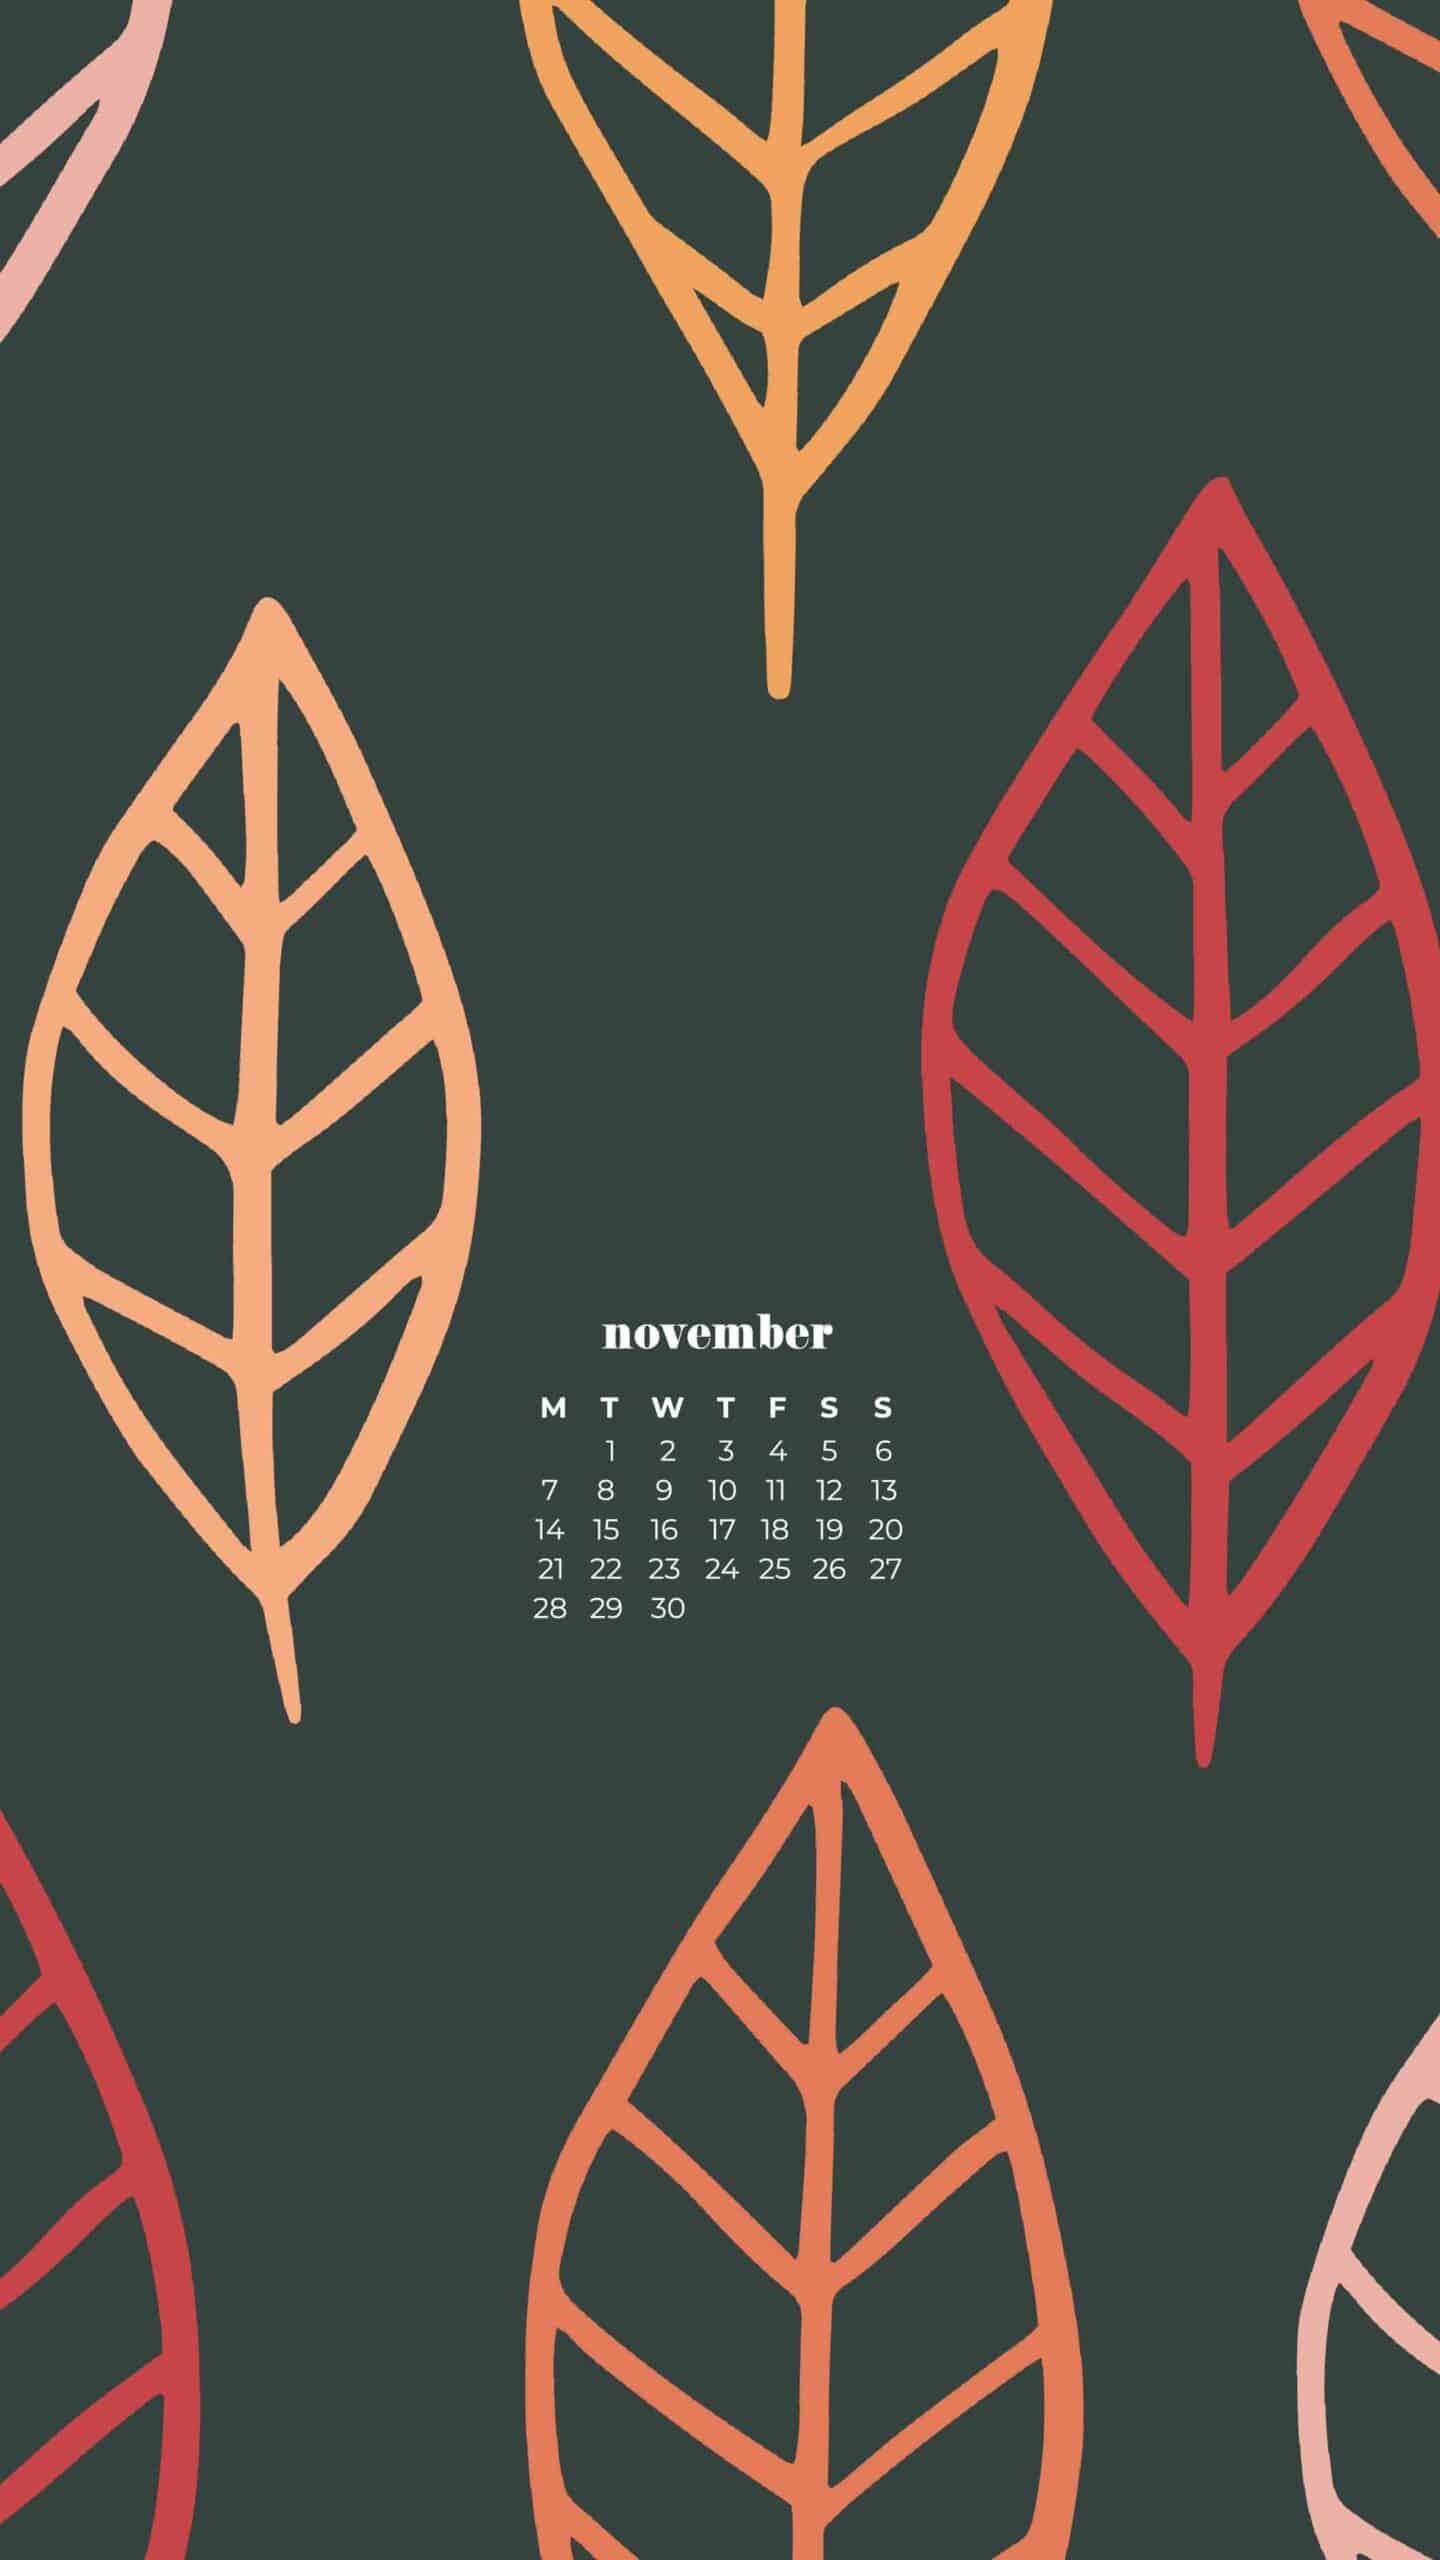 fall leaves illustrated on gray background November 2022 wallpapers – FREE calendars in Sunday & Monday starts + no-calendar designs. 59 beautiful options for desktop & smart phones!